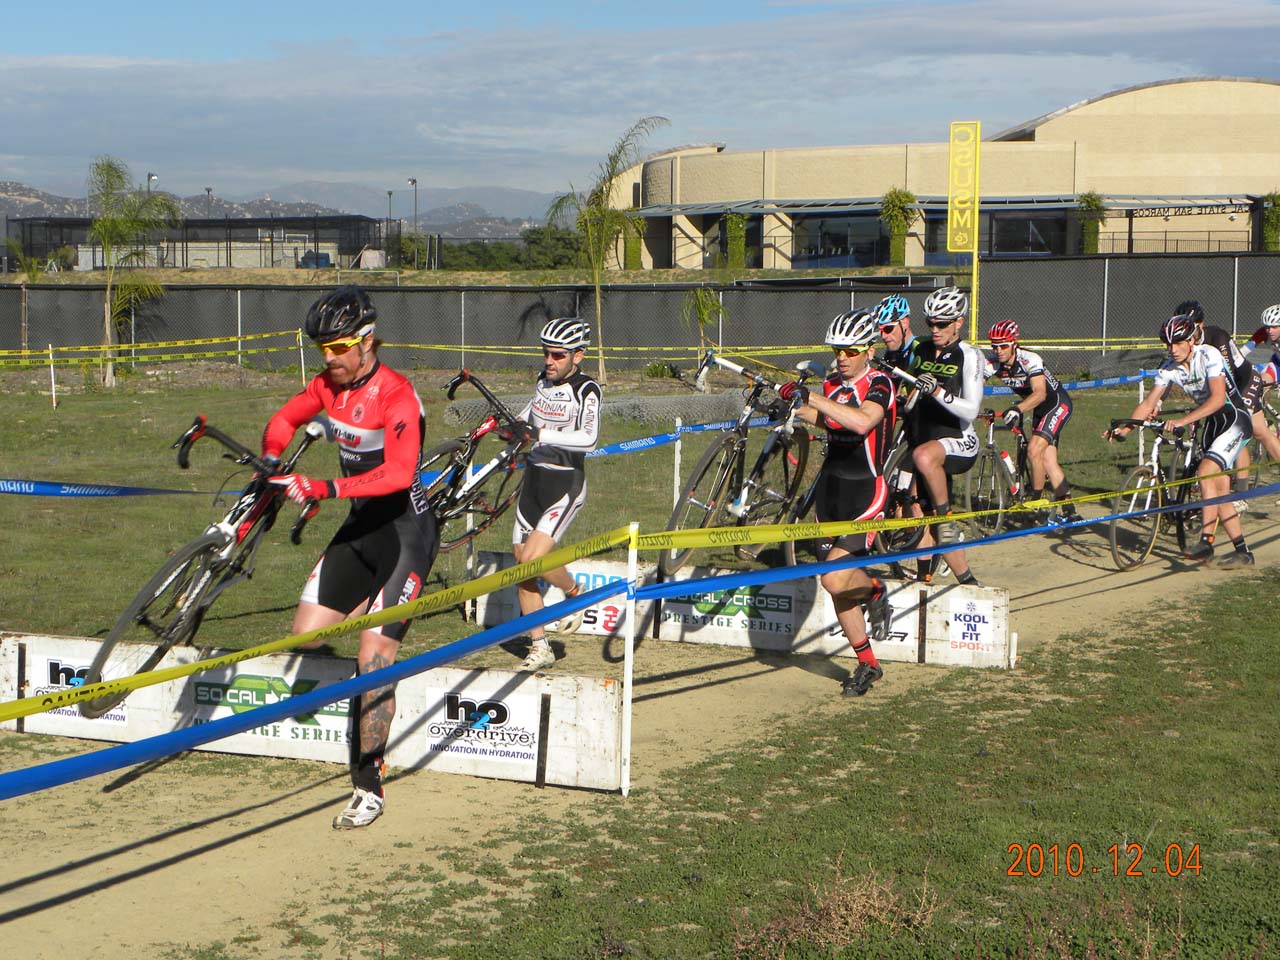 Riders hit the barriers en masse at Campus Cross. © Kenneth Hill, Light and Shadow Photography